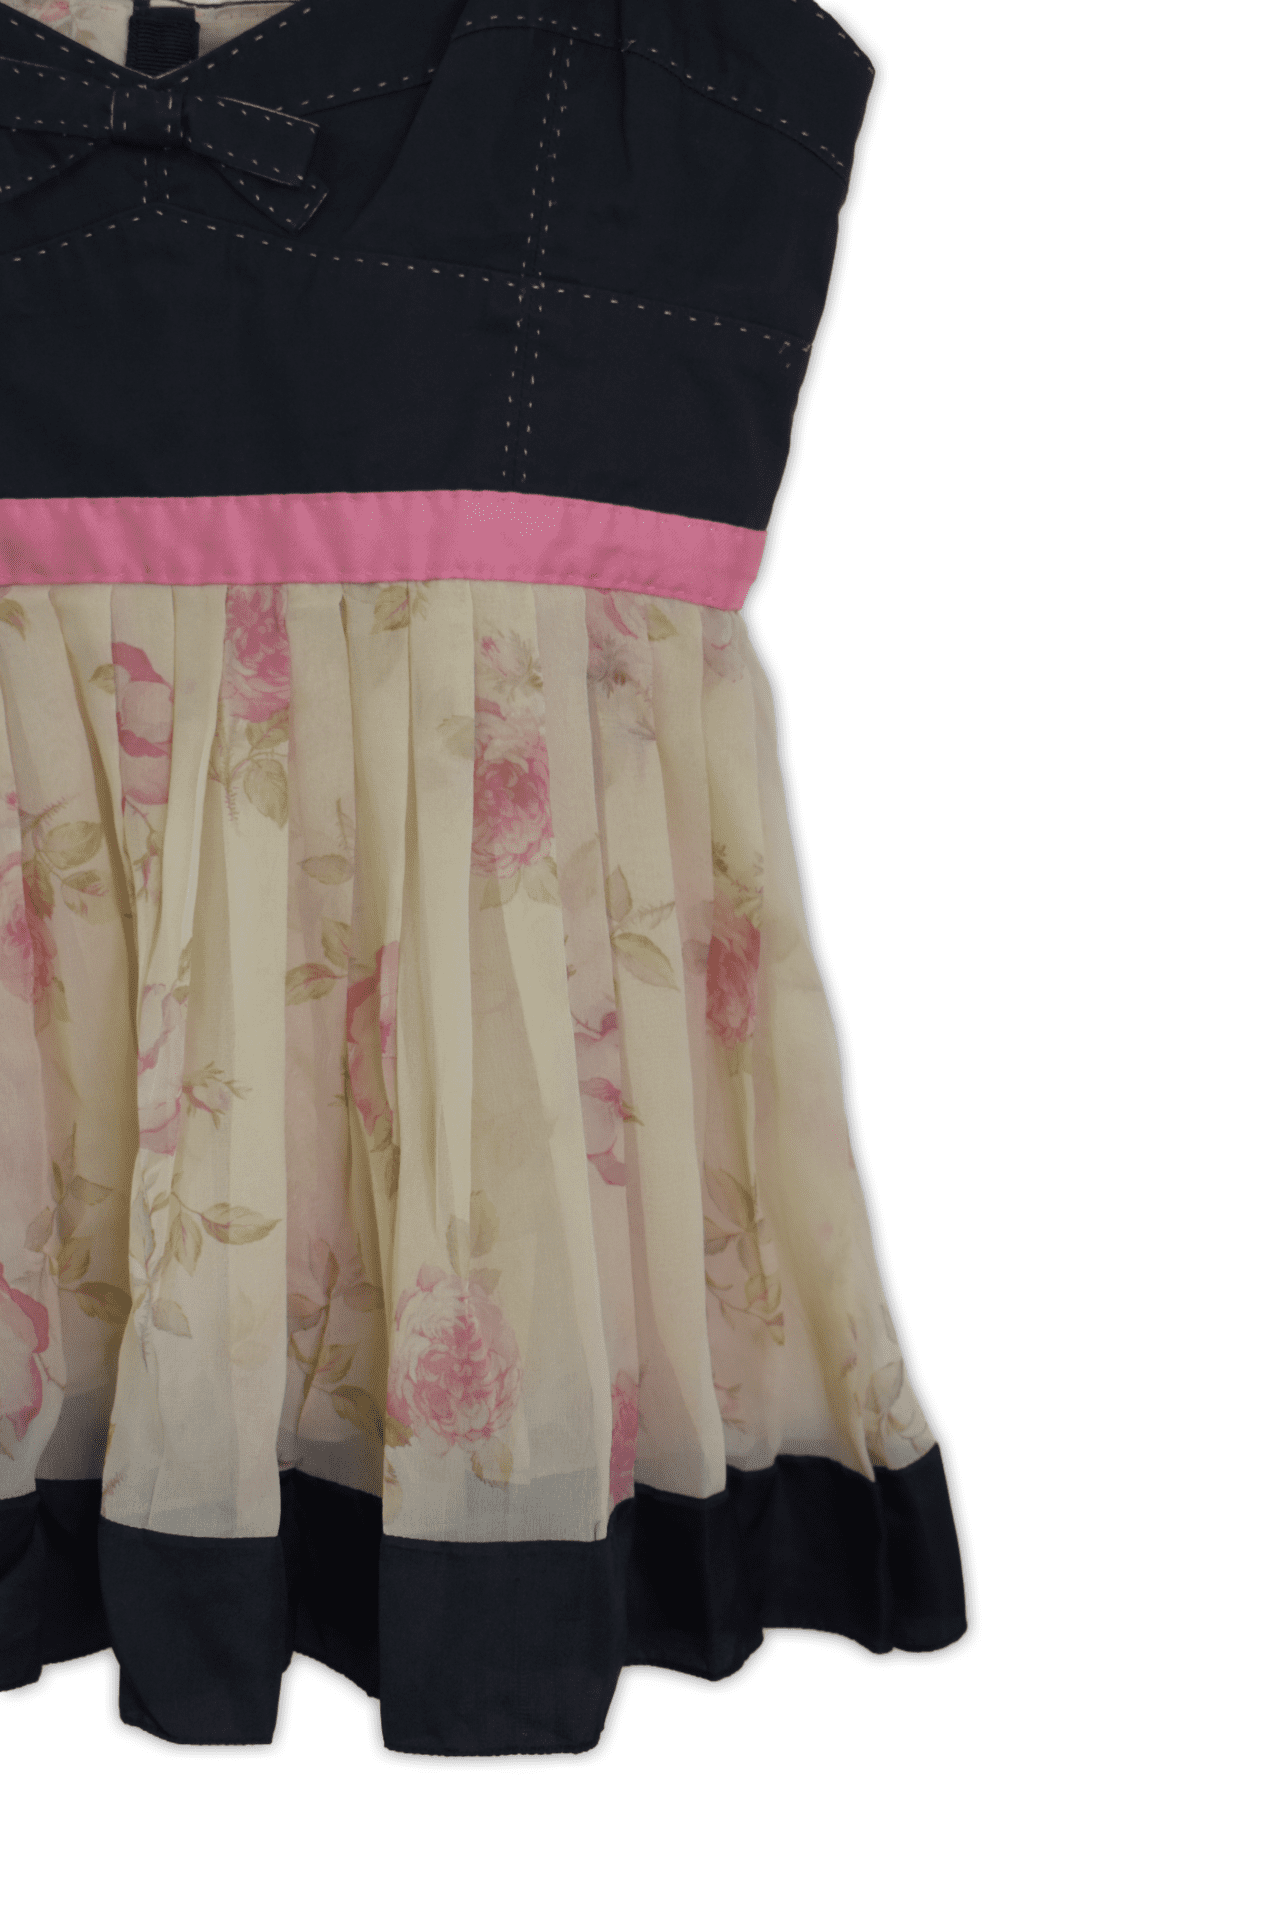 Plisse Pleat, floral paneled bodice featuring decorative center front bow, center back hook and eye closure and an accordion pleat silk base. Made in France.